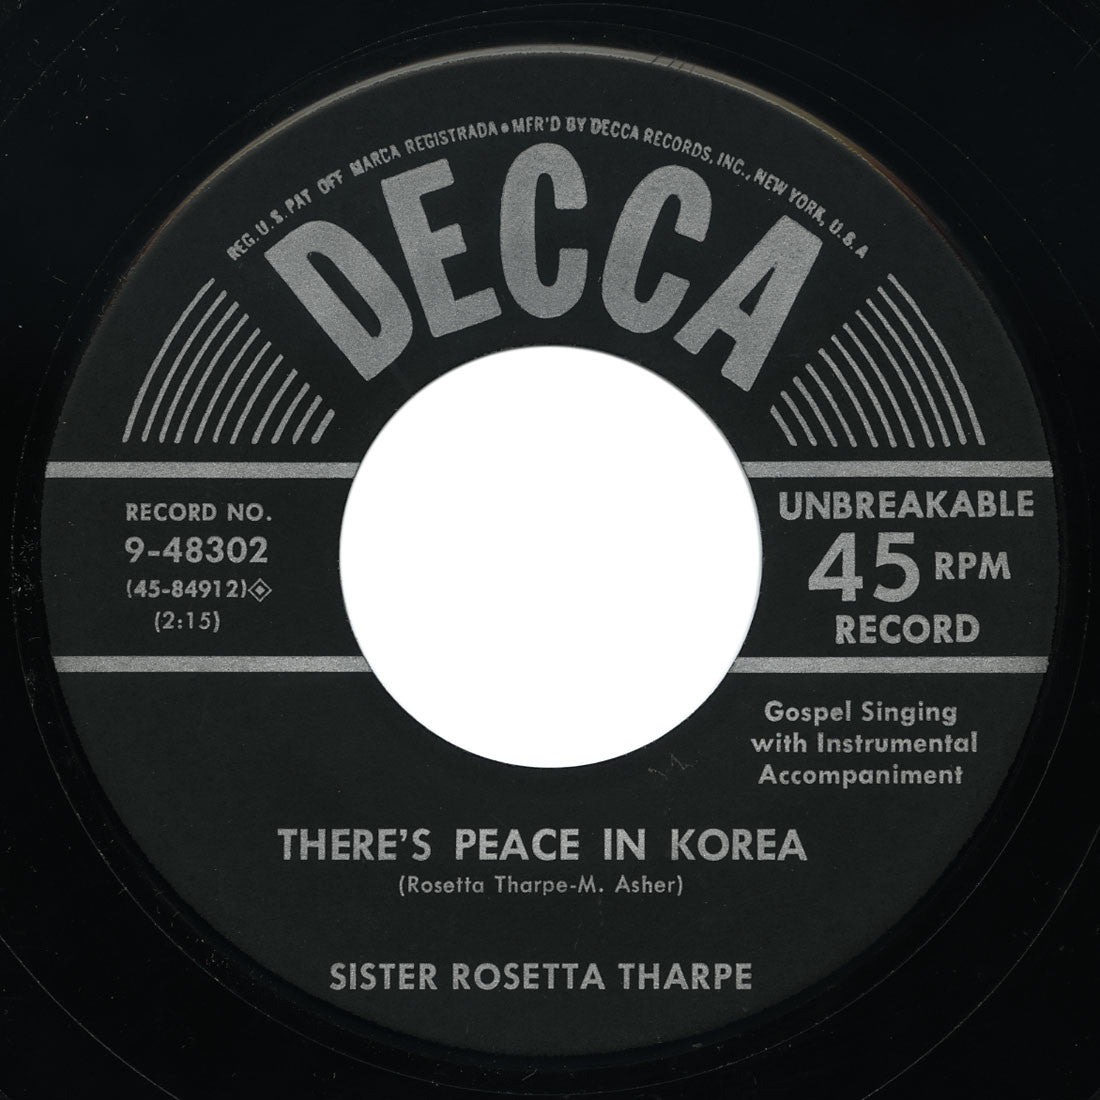 Sister Rosetta Tharpe - There’s Peace In Korea / Crying In The Chapel - Decca